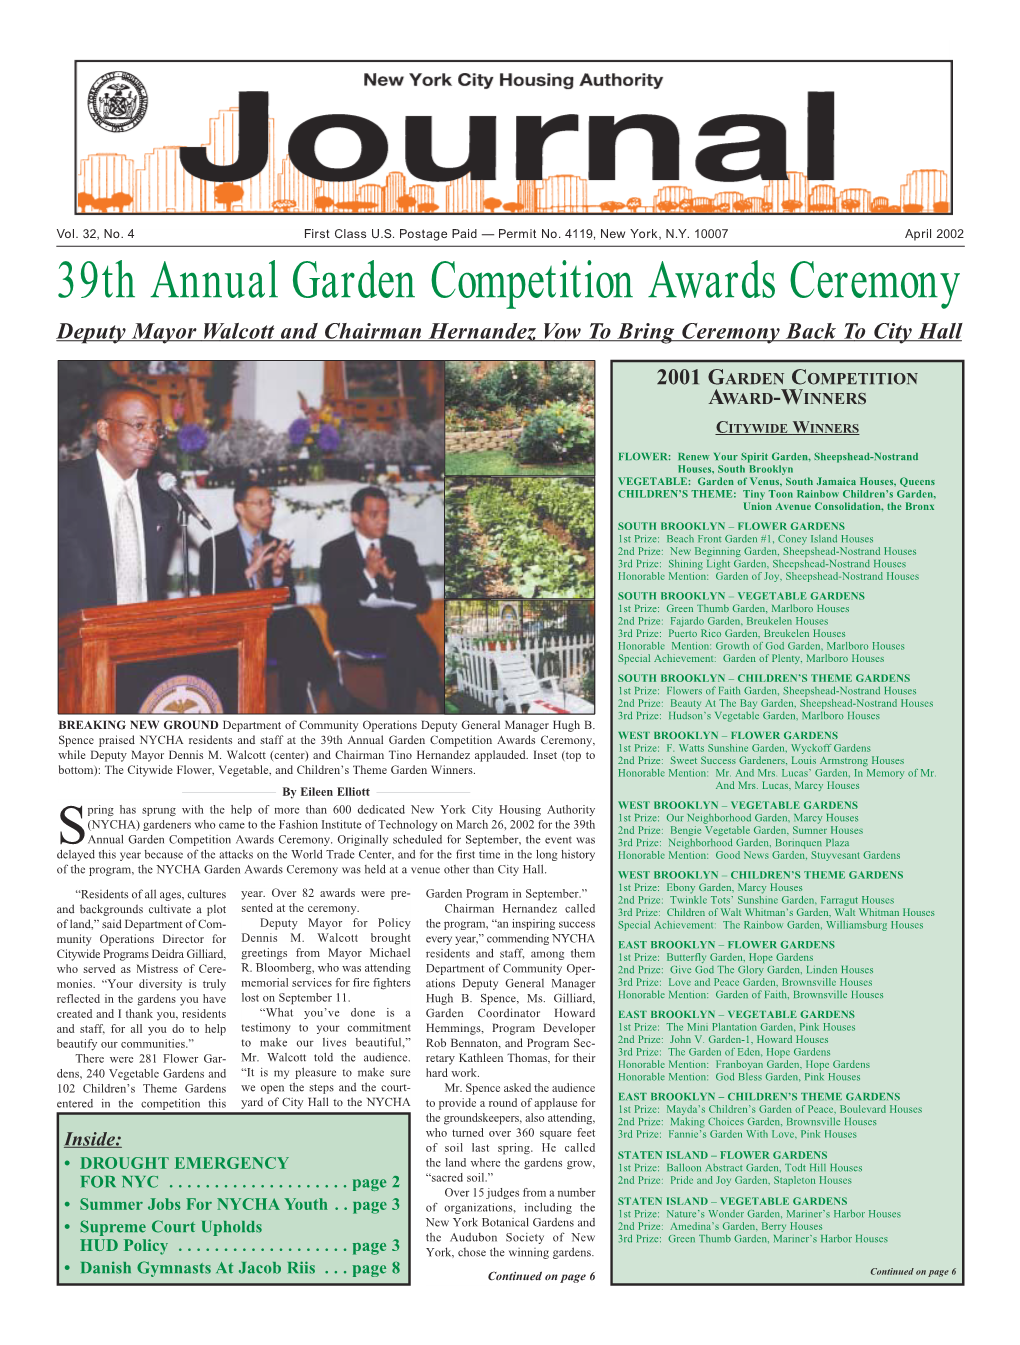 The NYCHA Garden Awards Ceremony Was Held at a Venue Other Than City Hall